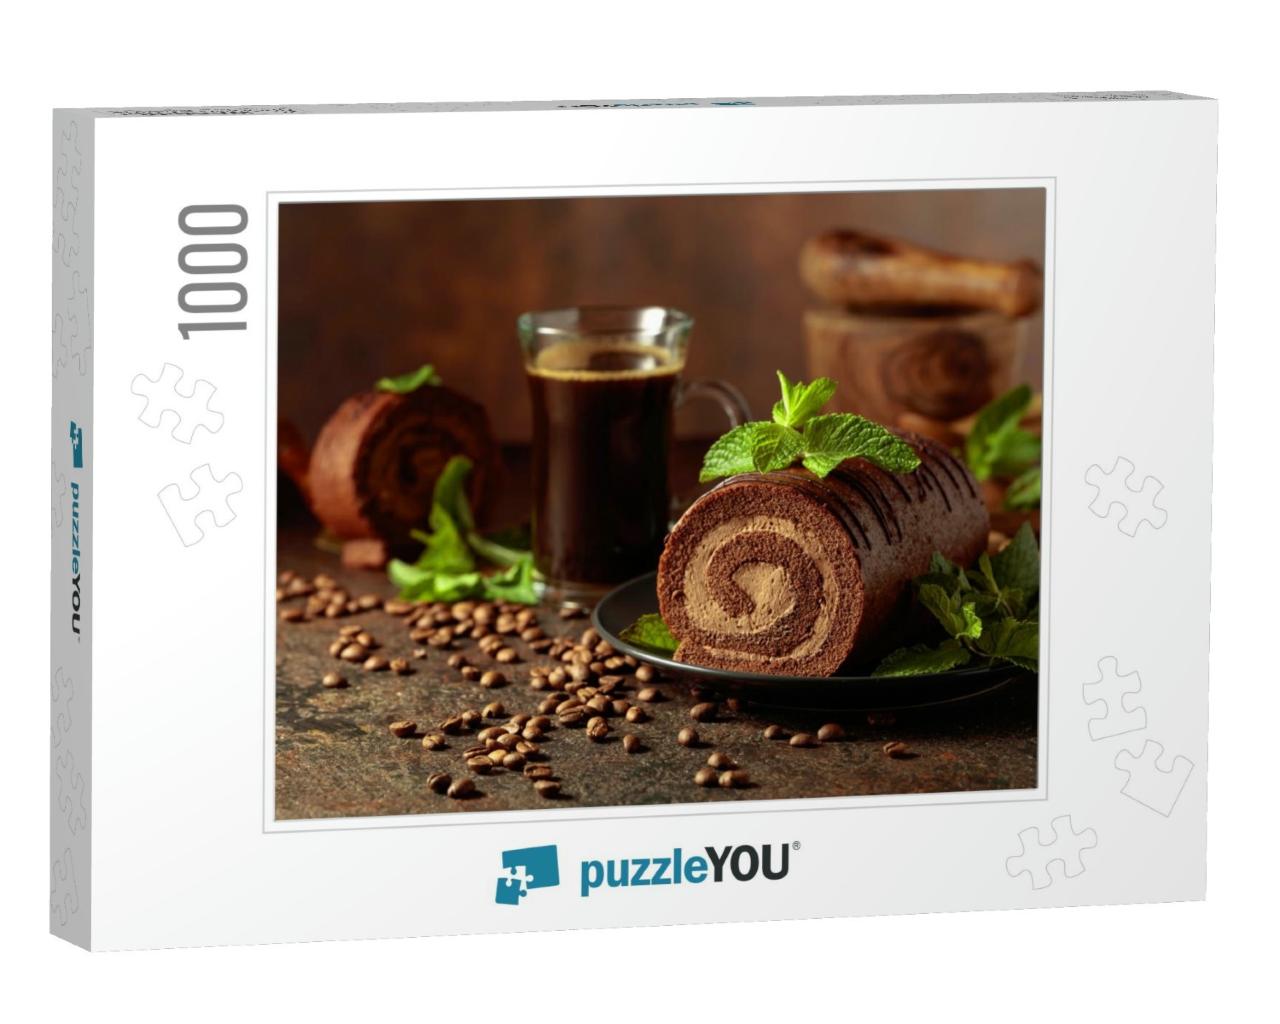 Homemade Chocolate Cake with Mint & a Mug of Black Coffee... Jigsaw Puzzle with 1000 pieces